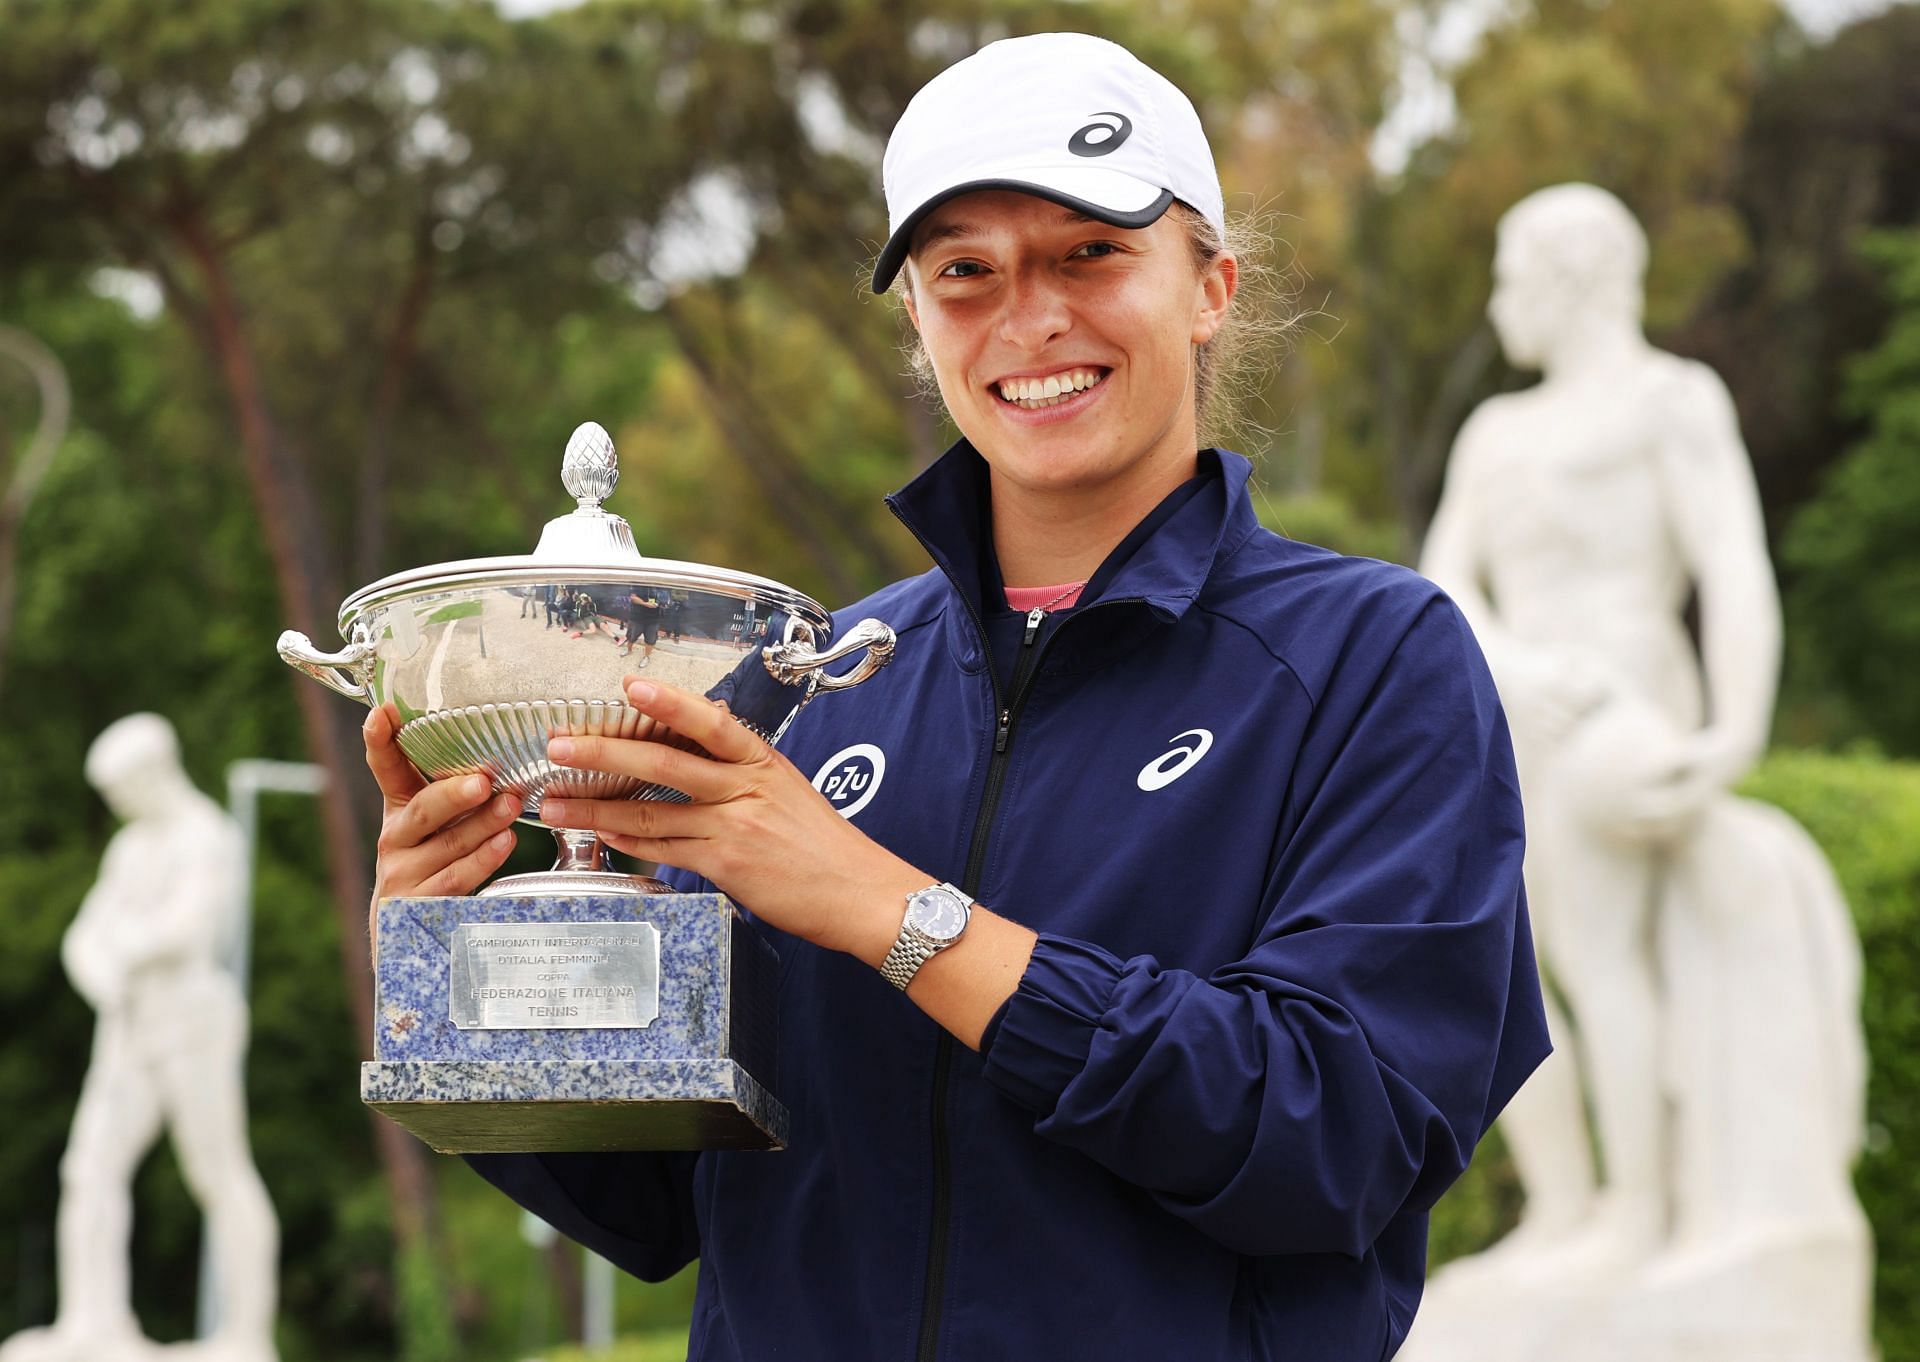 Italian Open 2022 Where to watch, TV schedule, live streaming details and more